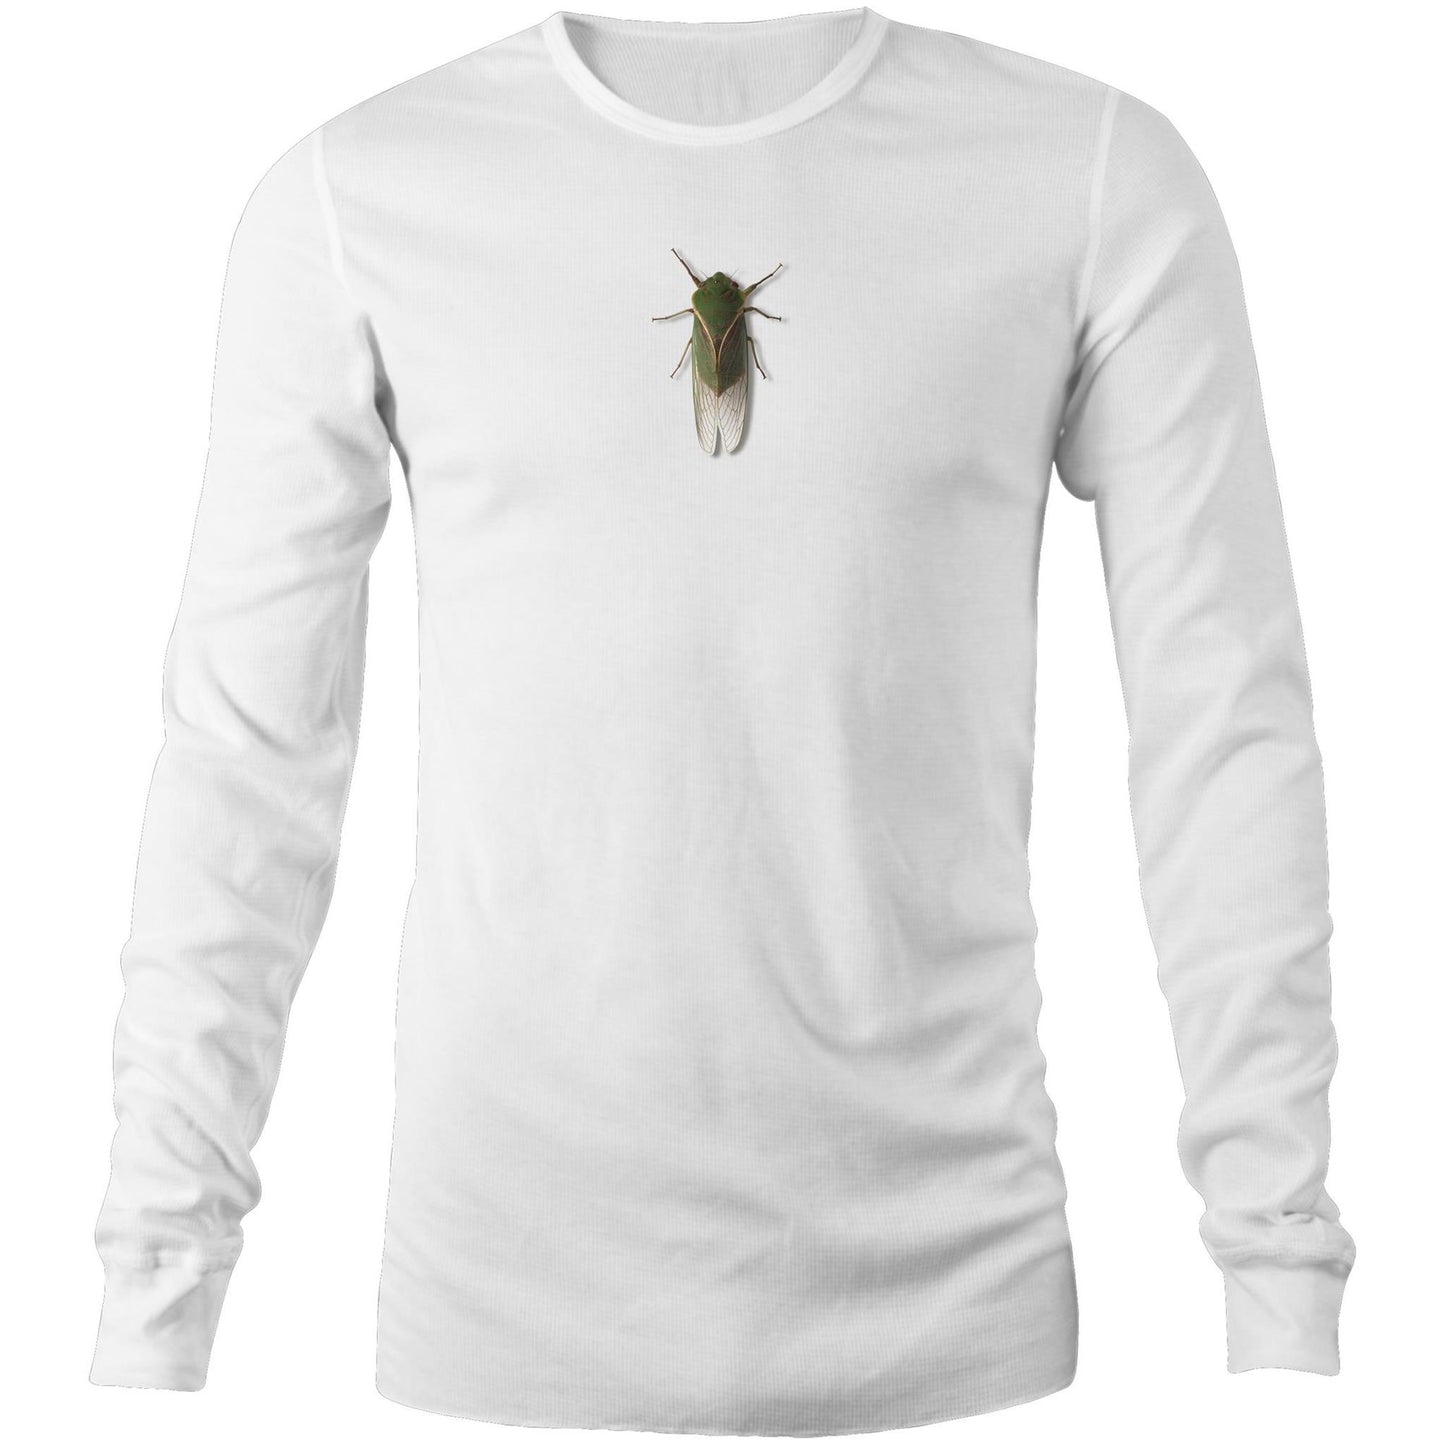 The Little Guy Long Sleeve T Shirts